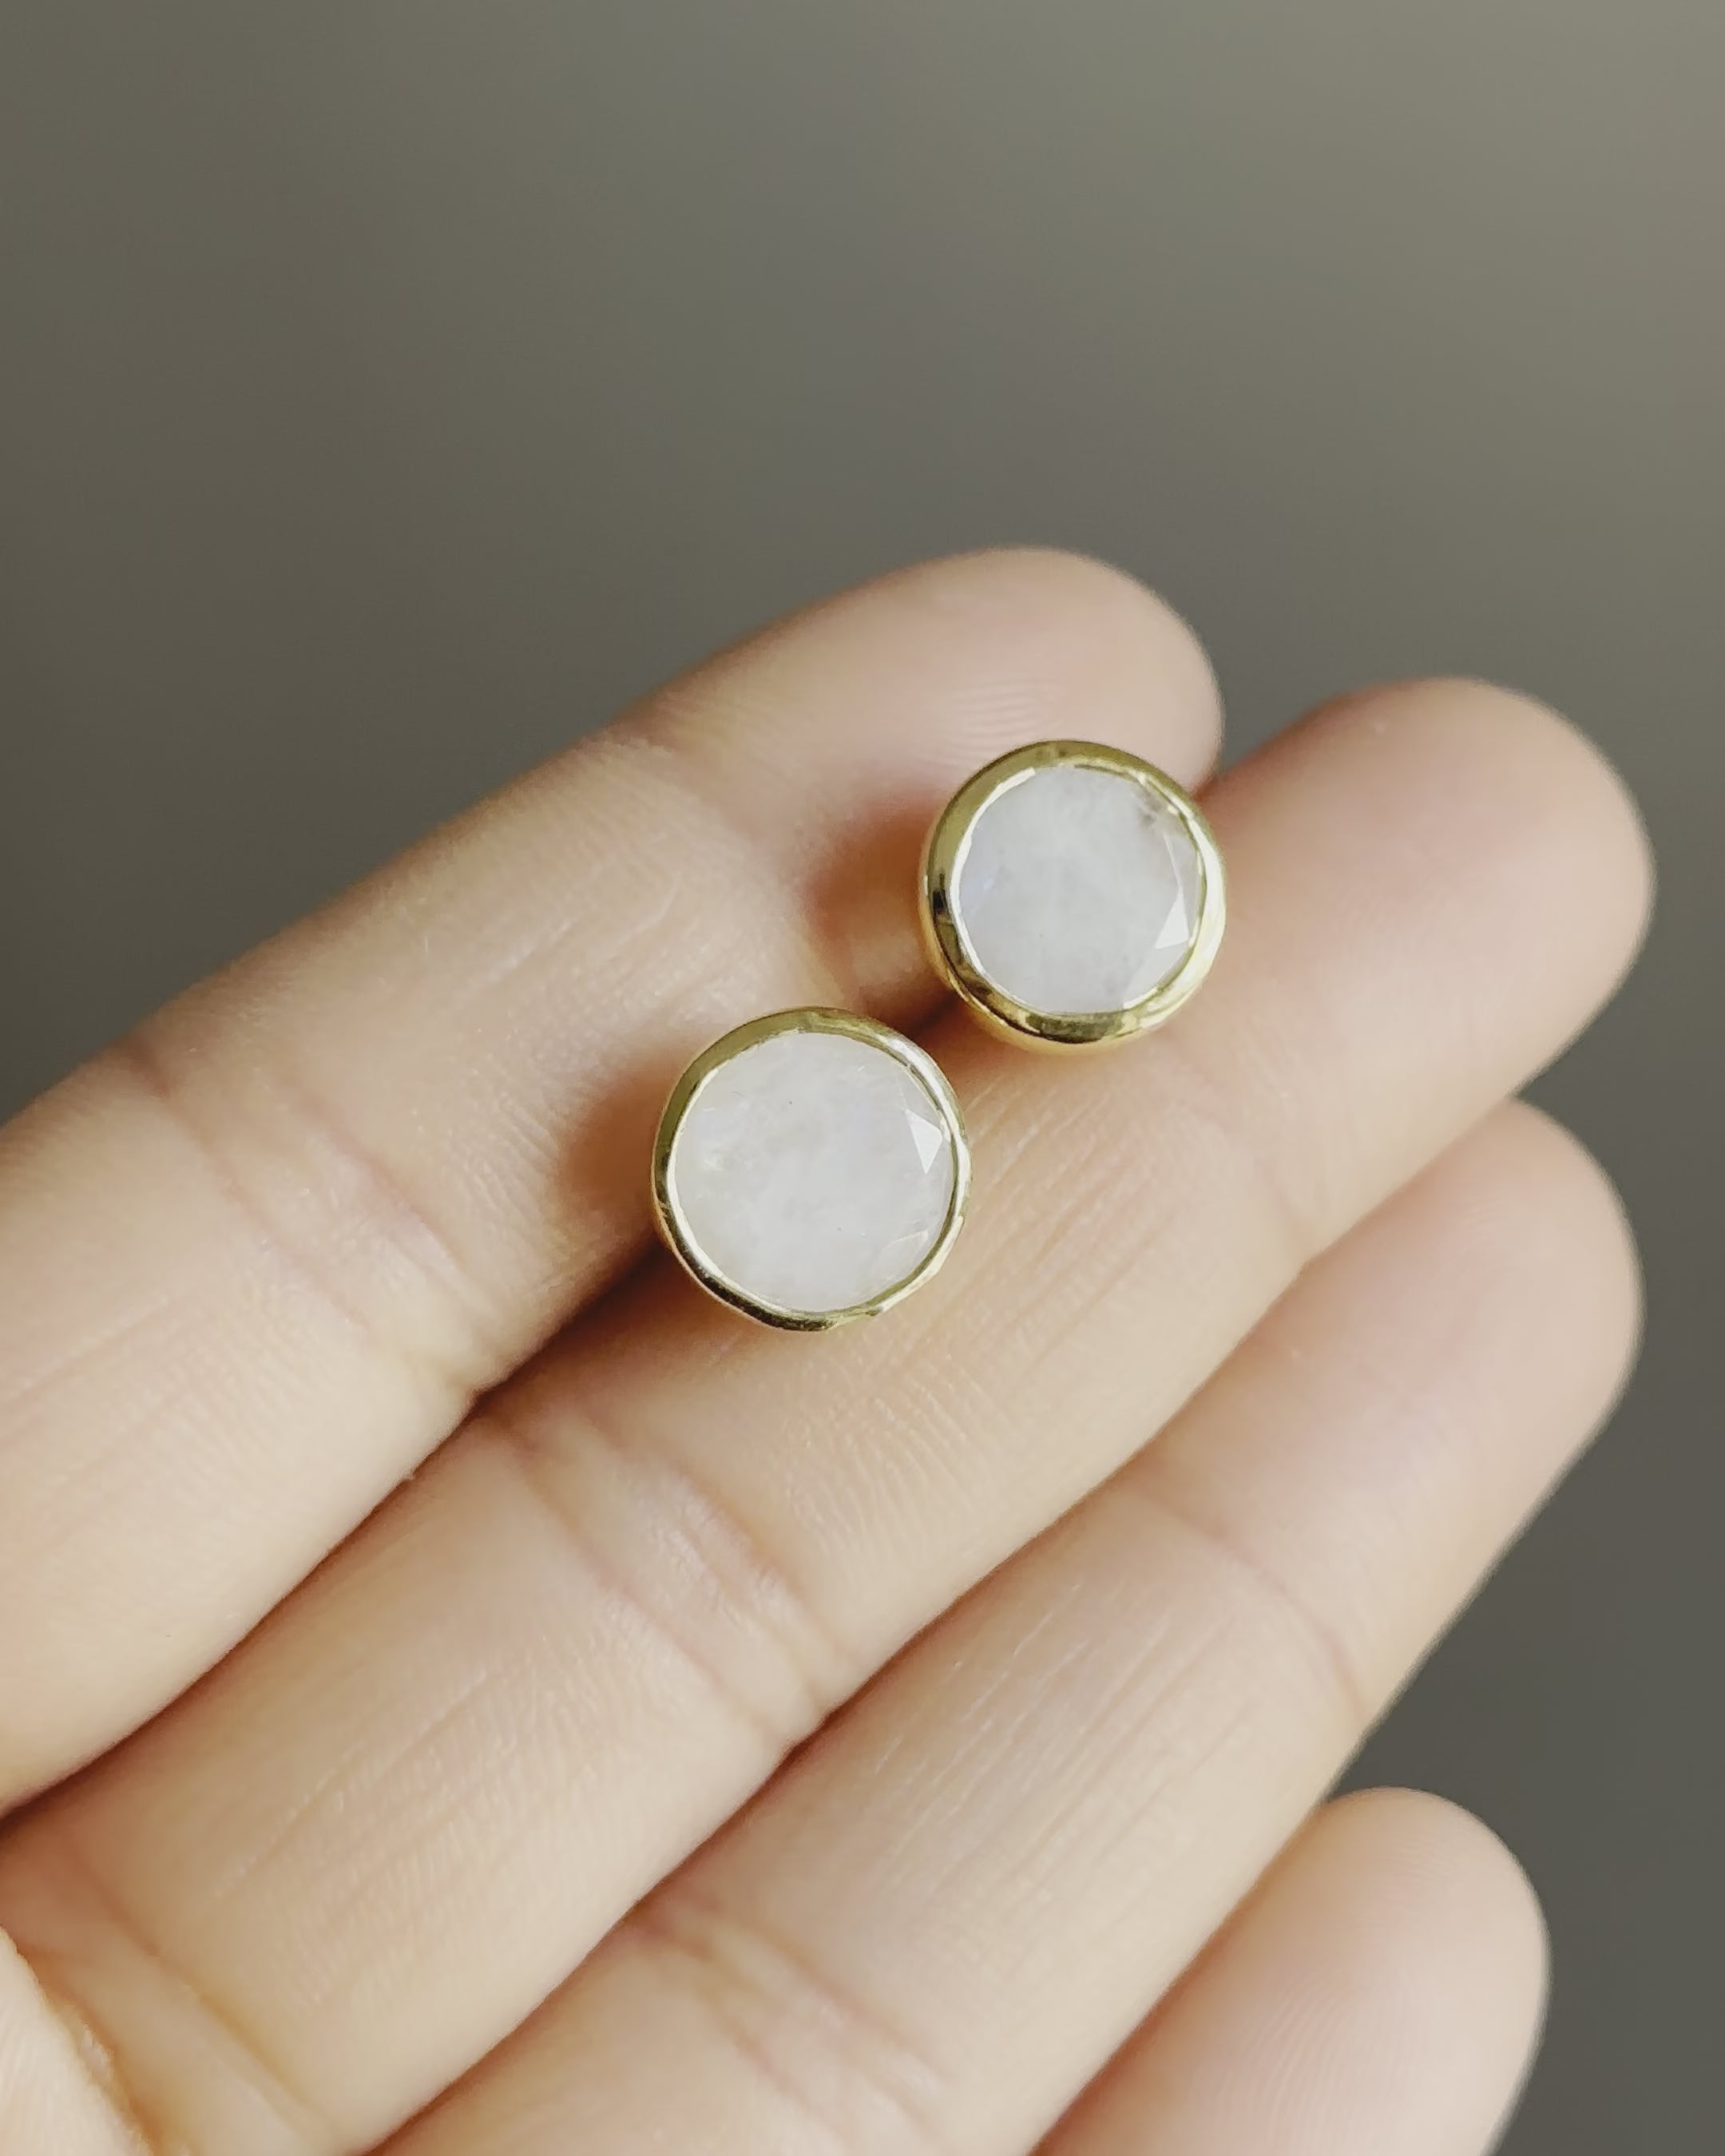 Moonstone Studs in Gold Plated Sterling Silver with a Round Faceted Gemstone